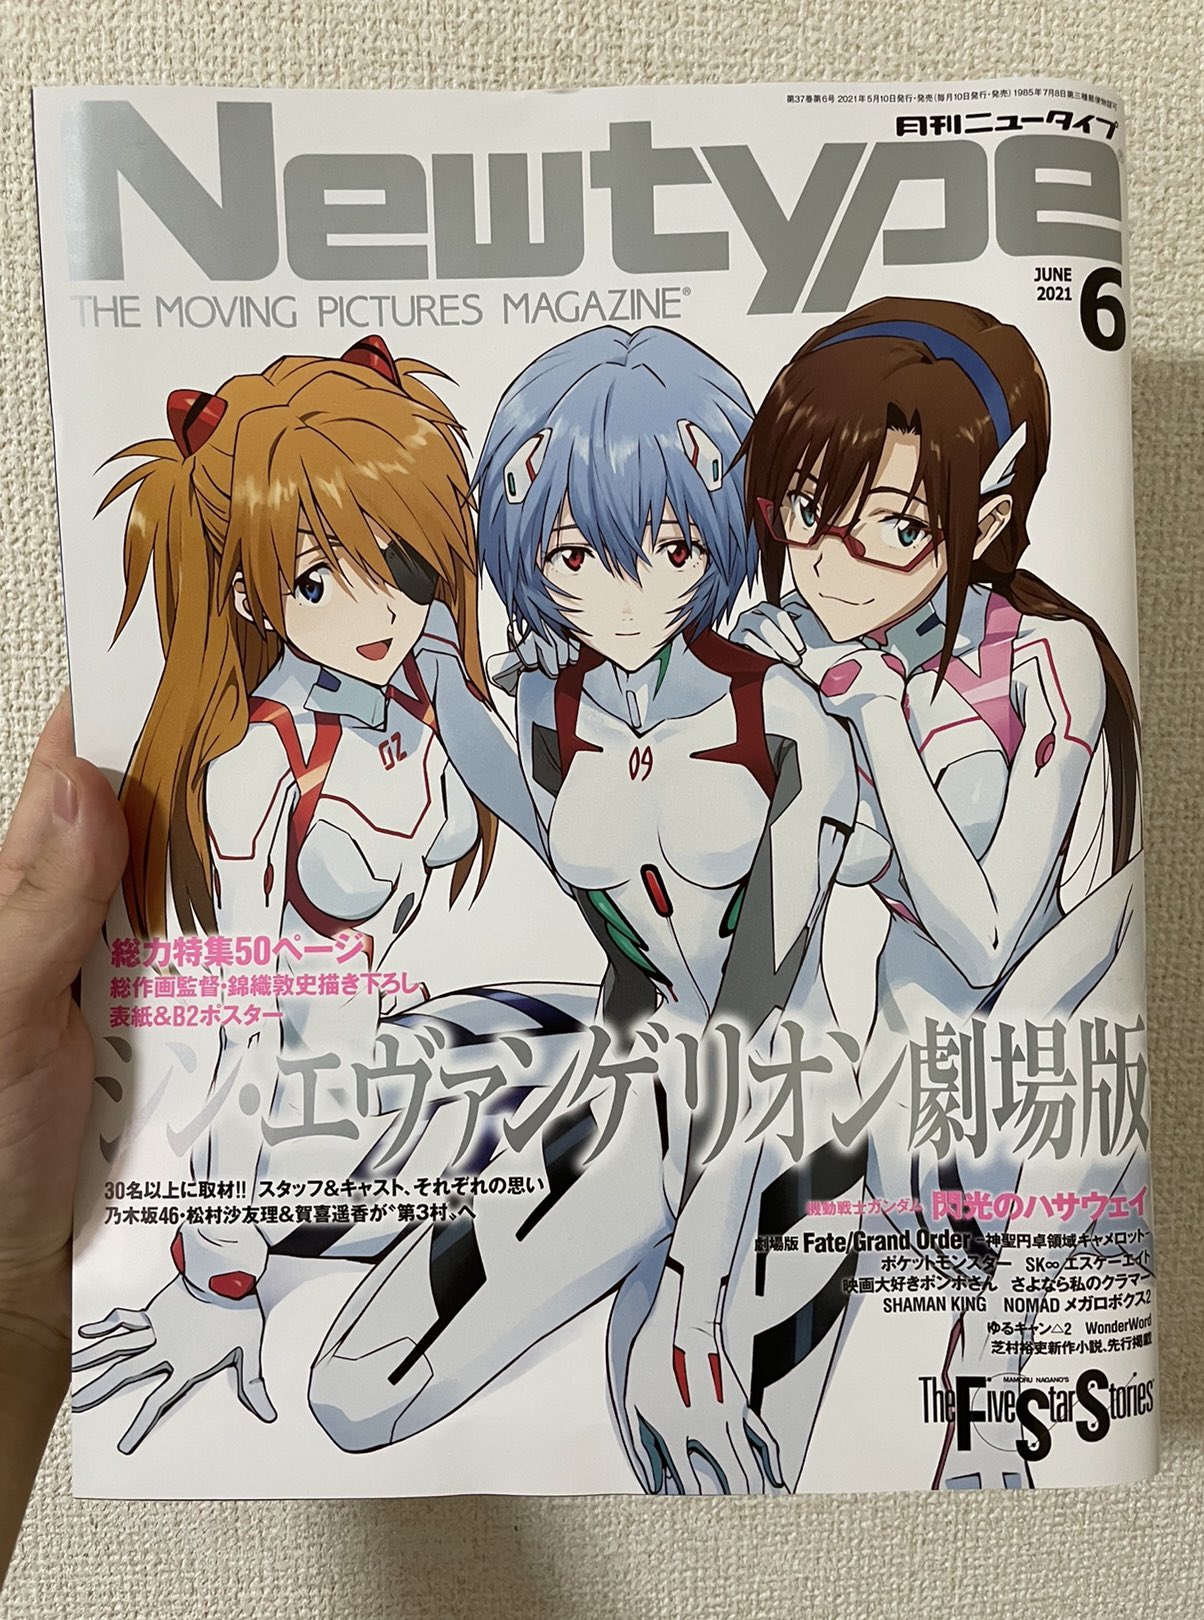 Kyle Anime Scouter I Bought The June Issue Of Newtype This Month S Issue Features Evangelion Look At This Cover It S Really Cute Evangelion T Co Vf8xycwxpy Twitter